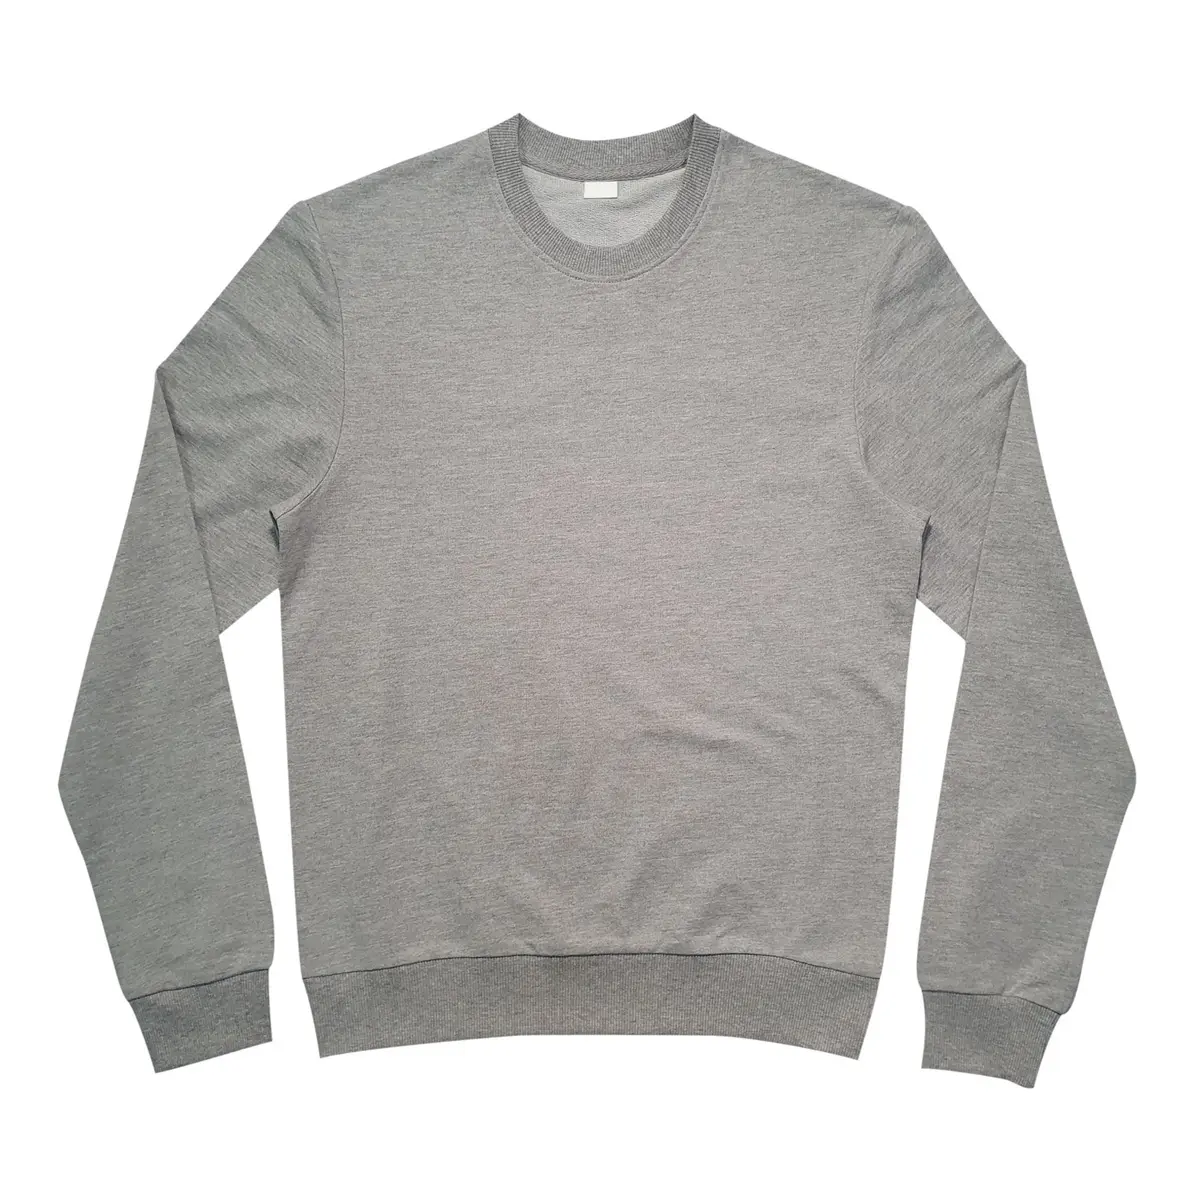 Casual style Sweatshirt for men Regular sleeves O-neck collar wholesale prices Cotton Gray